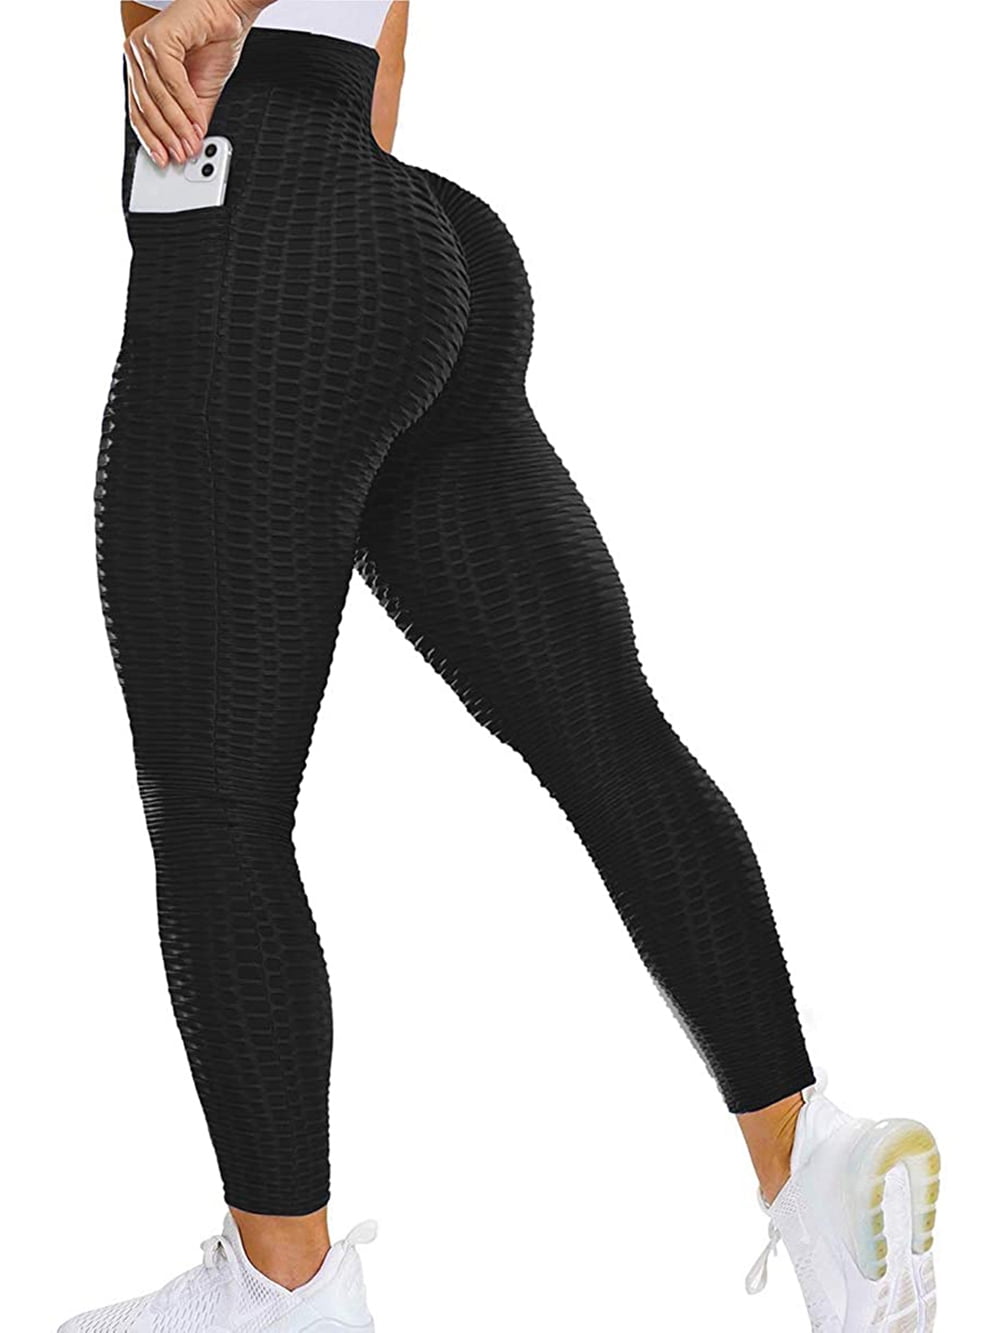 Casulo Althletic Pants Leggings with Pockets for Women High Waisted Yoga Pants for Women Workout Tummy Control Butt Lift